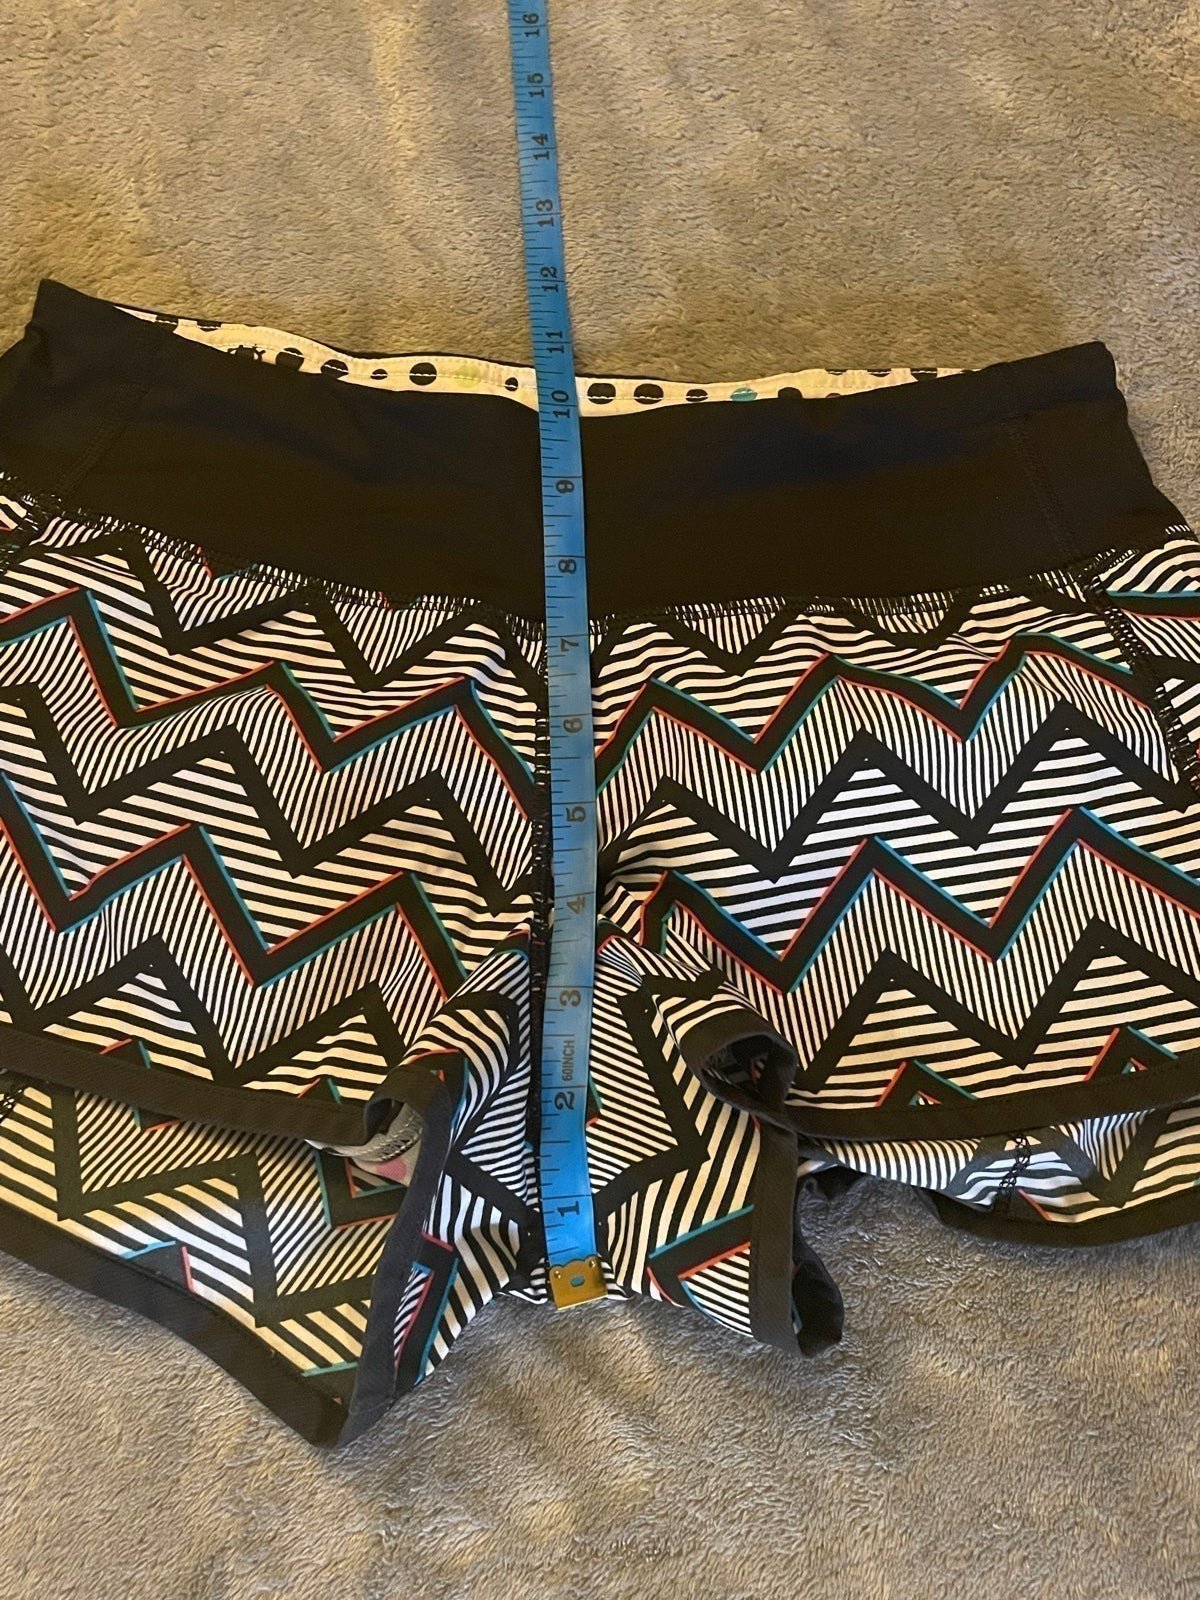 cheapest place to buy  Lululemon Speed Shorts Seawheeze 2014 size 2 in8V3veGS best sale